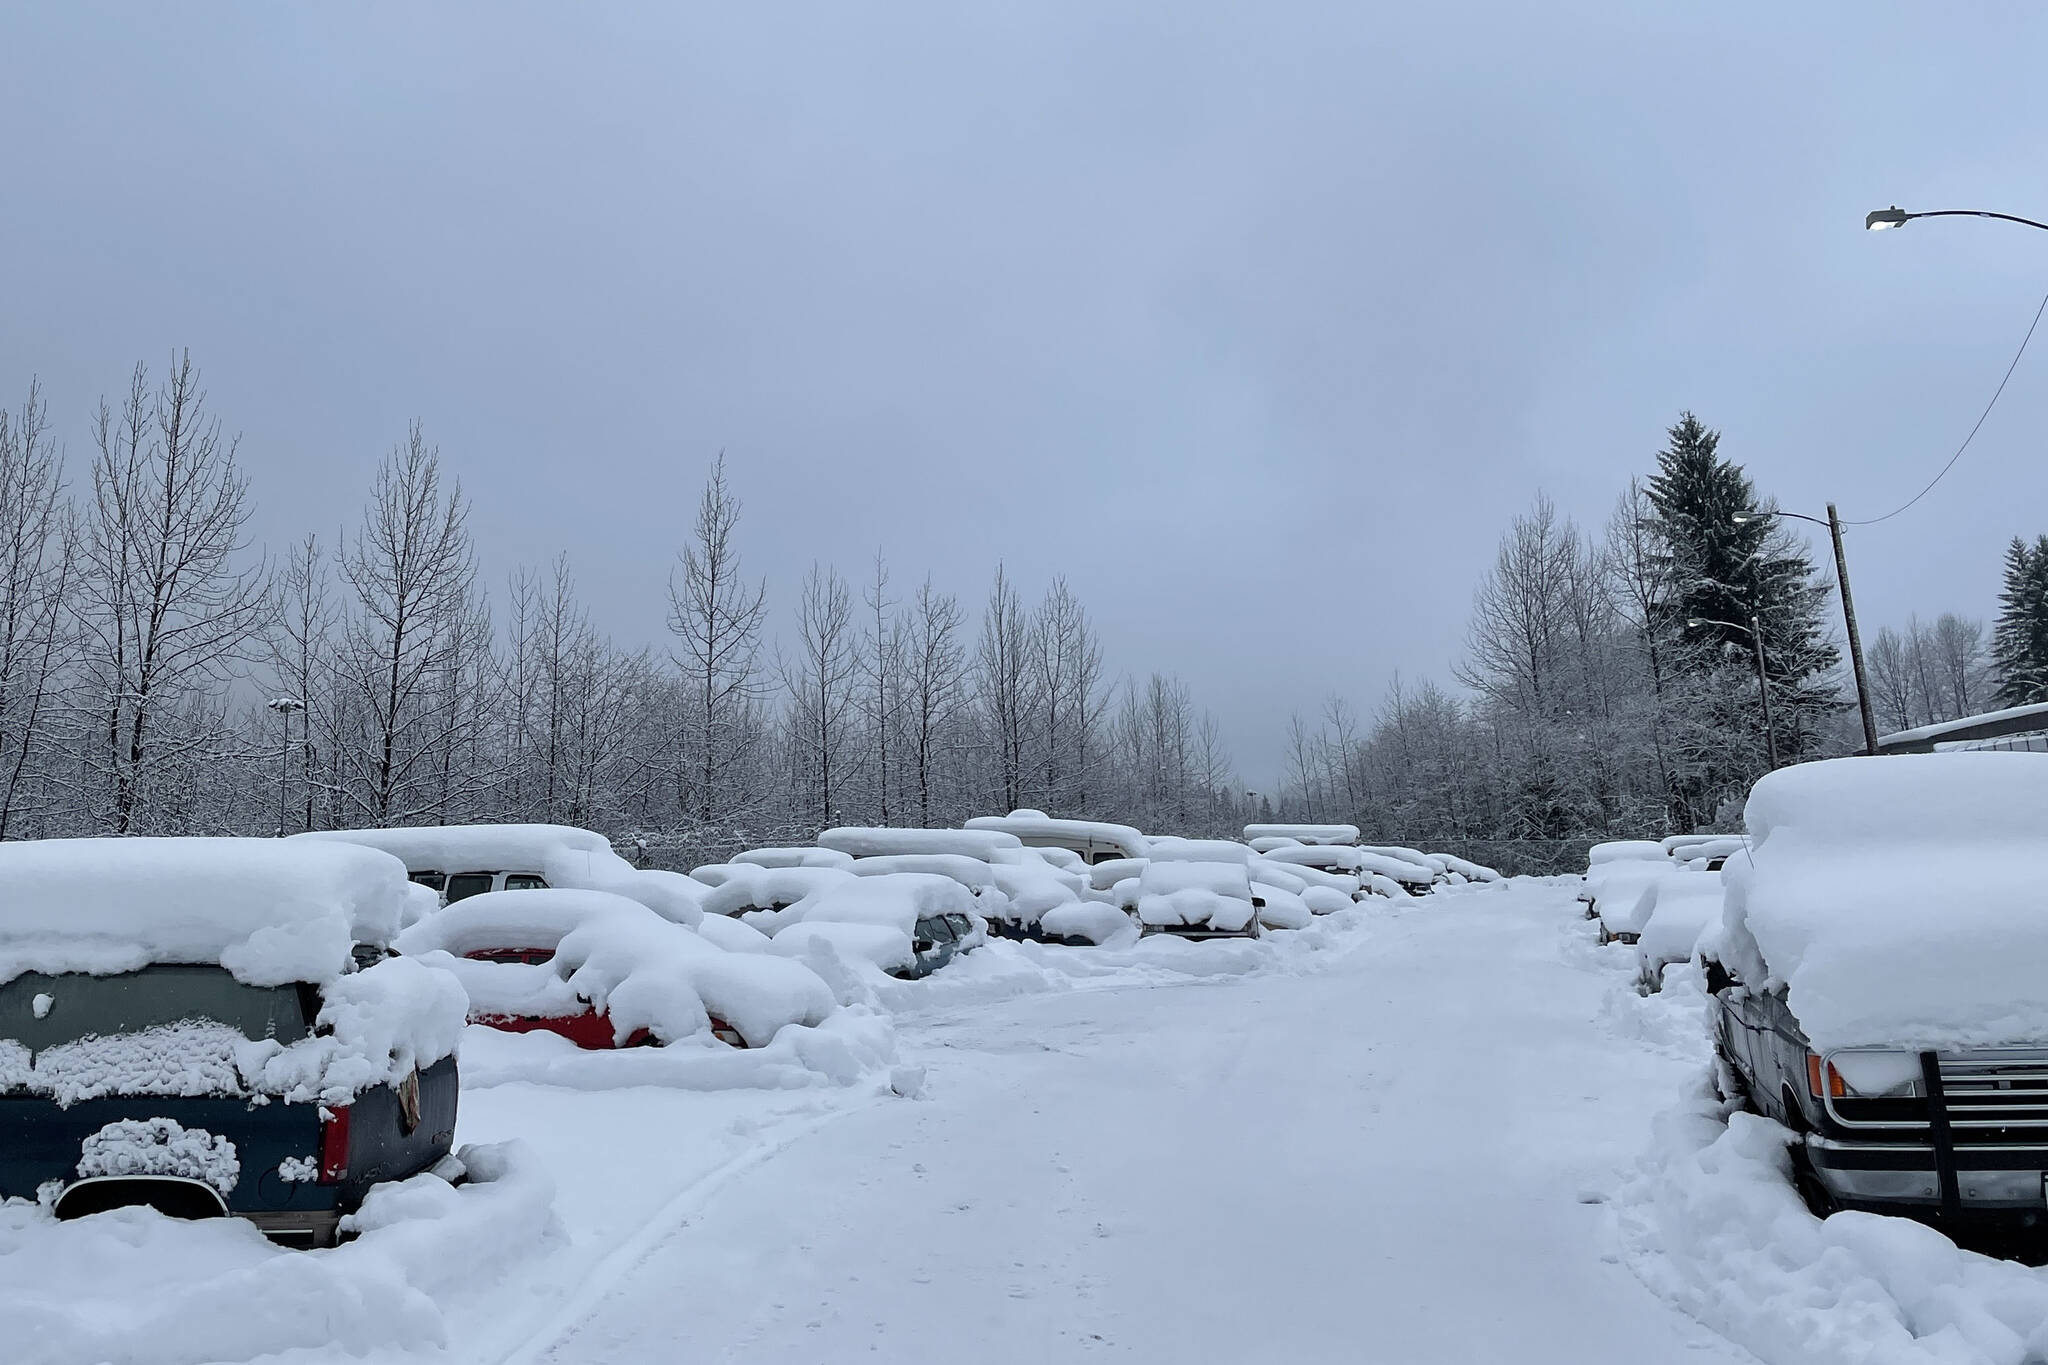 This photo shows vehicles at the city impound lot in Lemon Creek on Dec. 9, 2021. Space is perpetually at a premium in the impound lot, which holds vehicles for all sorts of reasons. (Michael S. Lockett / Juneau Empire)